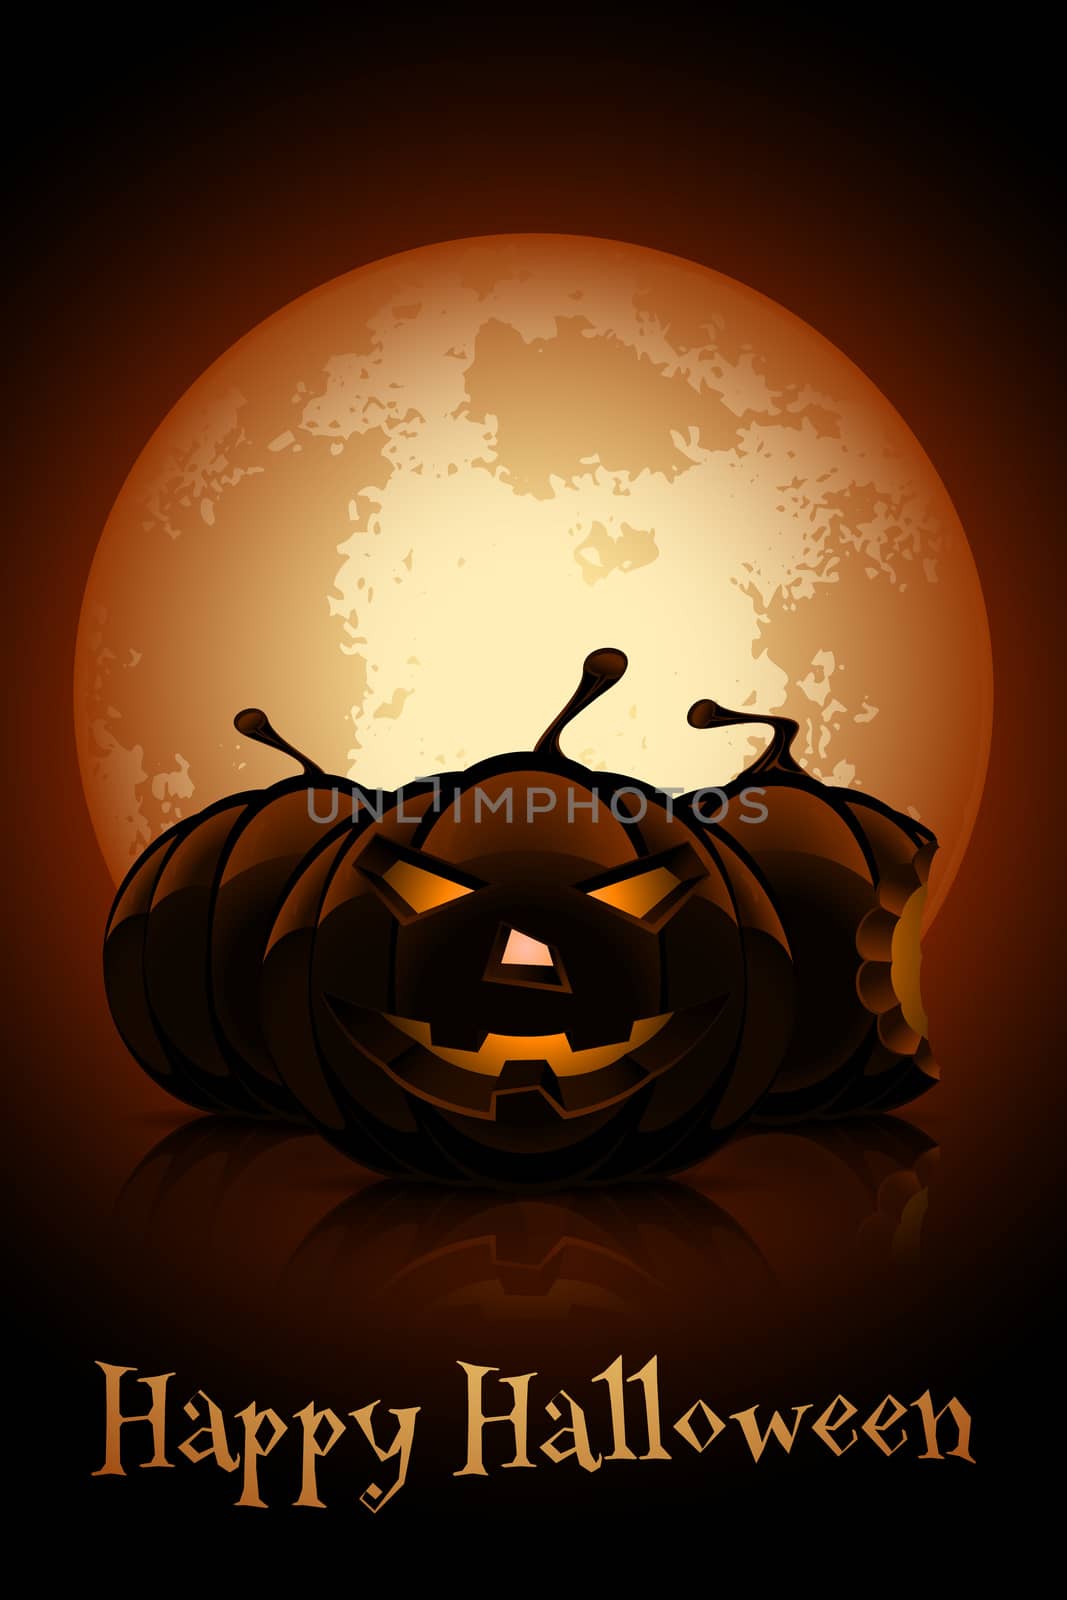 Happy Halloween Poster. Holiday Illustration with Moon and Pumpkins.